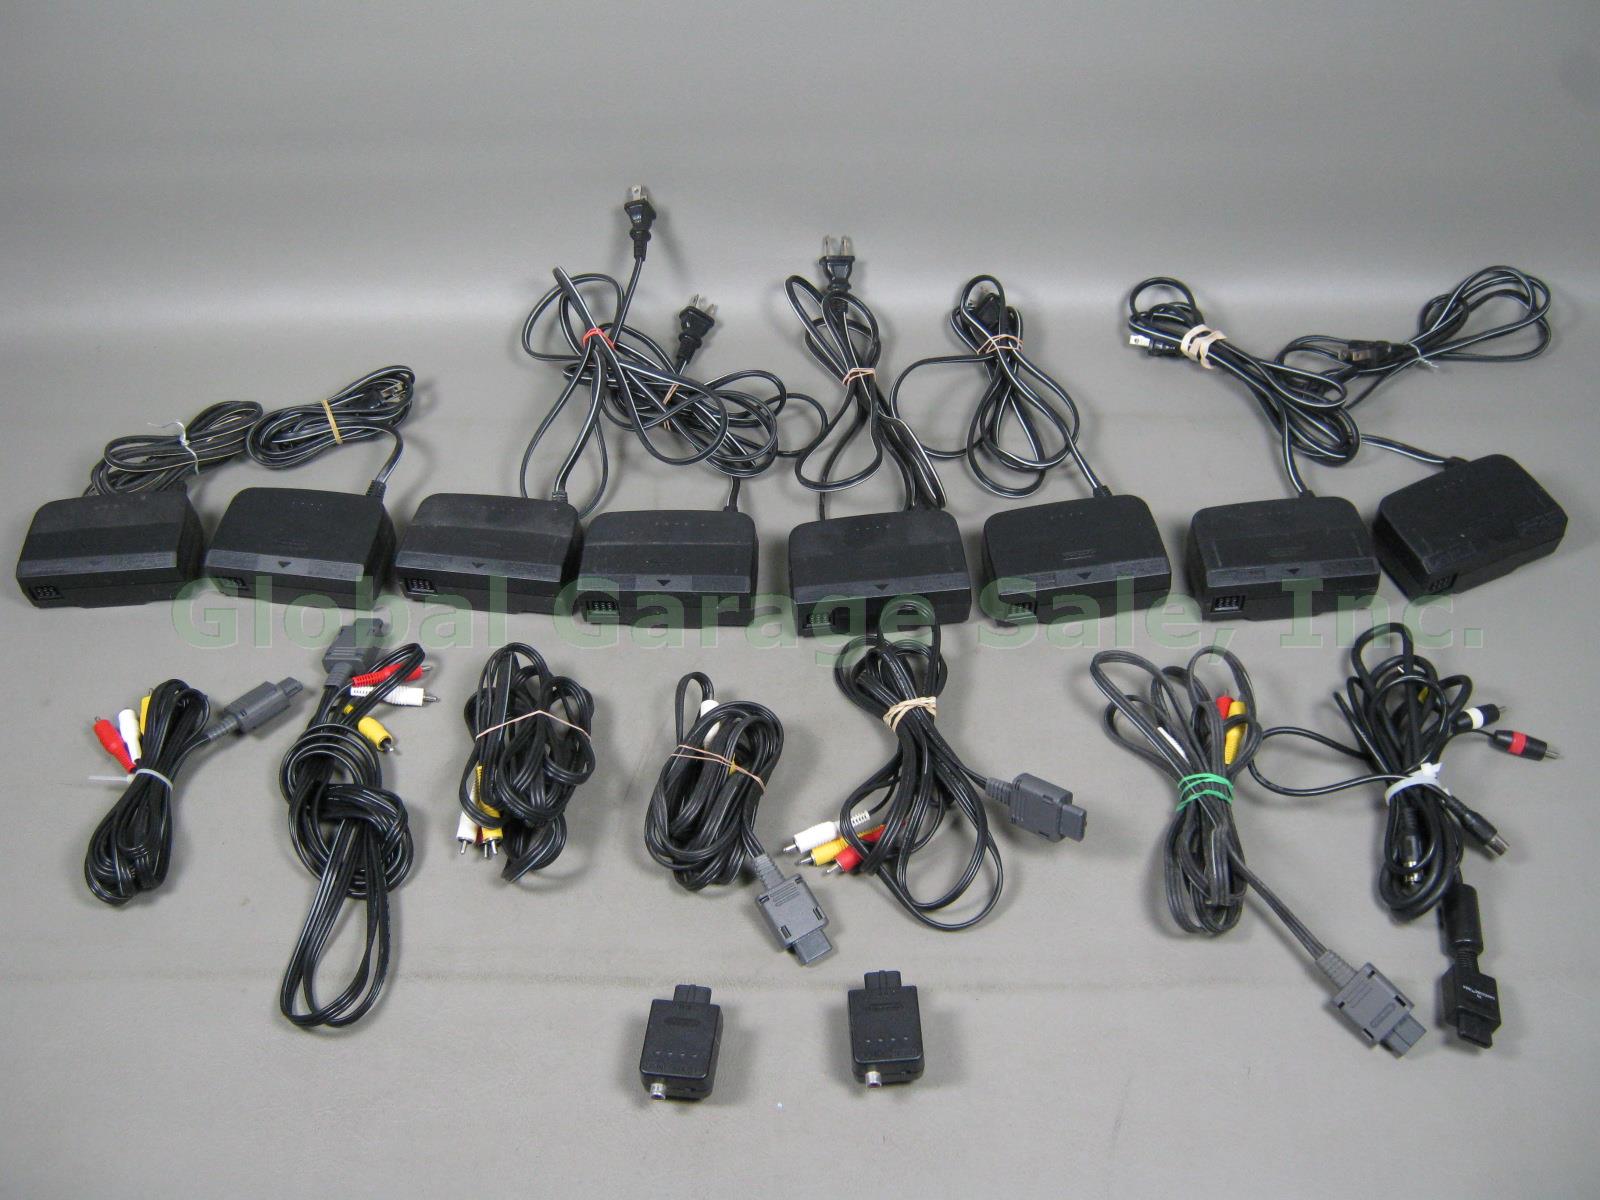 HUGE LOT 9 Nintendo 64 Console Systems 26 Controllers Rumble Pak Memory Card +++ 7